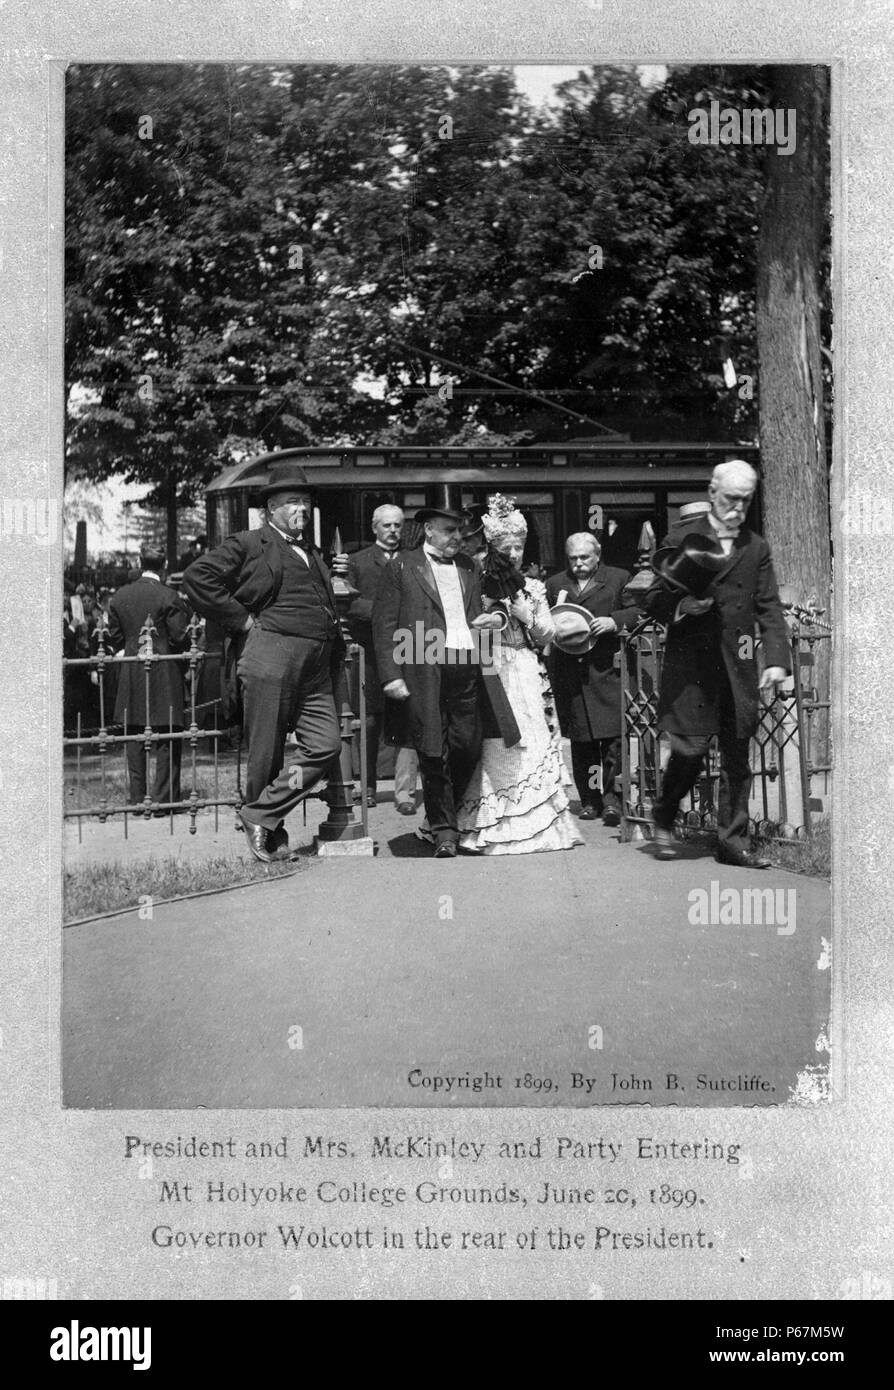 President and Mrs. McKinley and party entering Mt. Holyoke College grounds, June 20, 1899; Governor Wolcott in the rear of the President. McKinley (1843-1901)was the 25th President of the United States and led the nation to victory in the Spanish–American War, raised protective tariffs to promote American industry, and maintained the nation on the gold standard in a rejection of inflationary proposals. Stock Photo